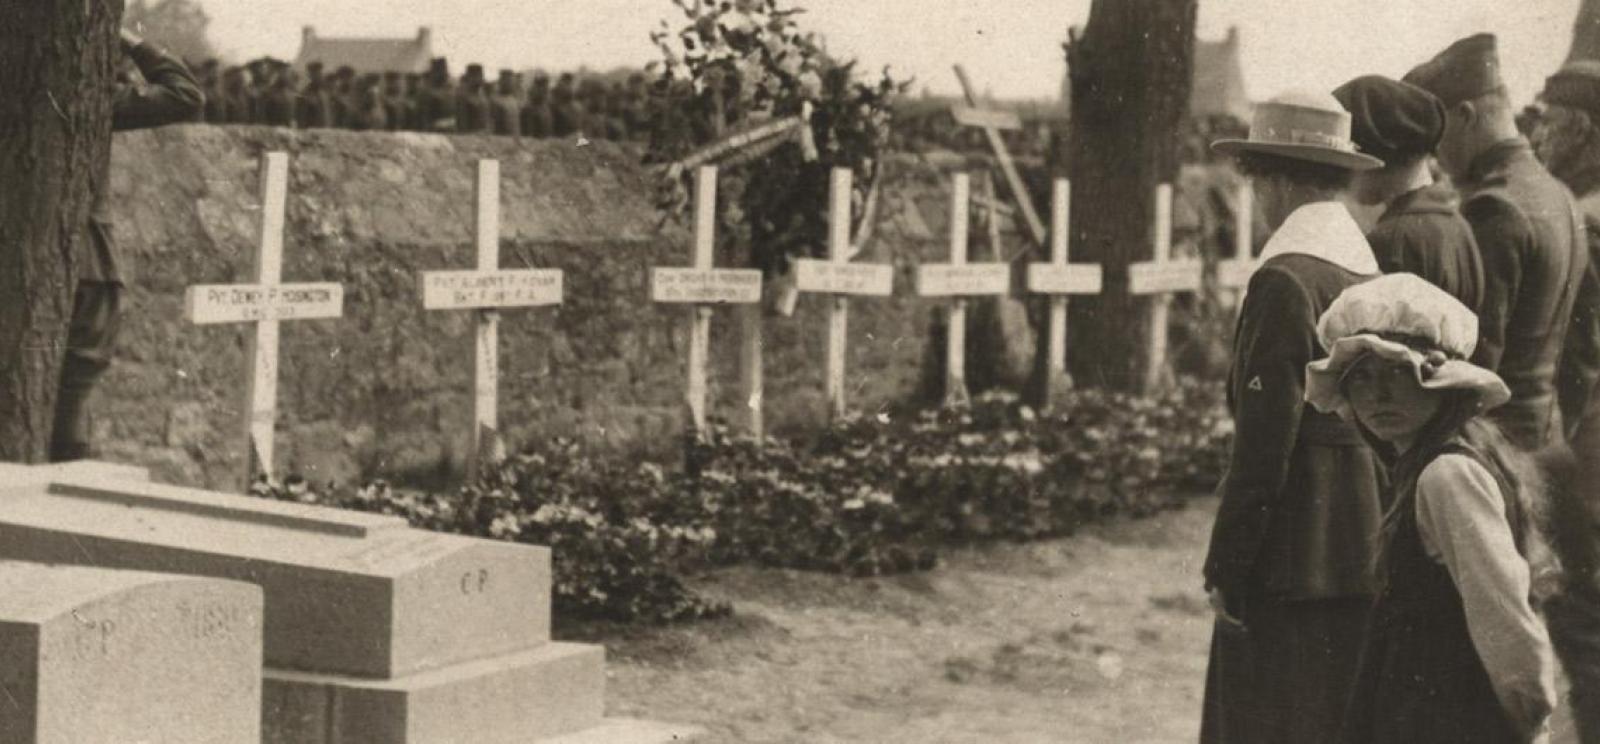 Sepia photograph of a row of people standing in front of a row of crosses. In the foreground a young girl in a large hat turns to look at the viewer.